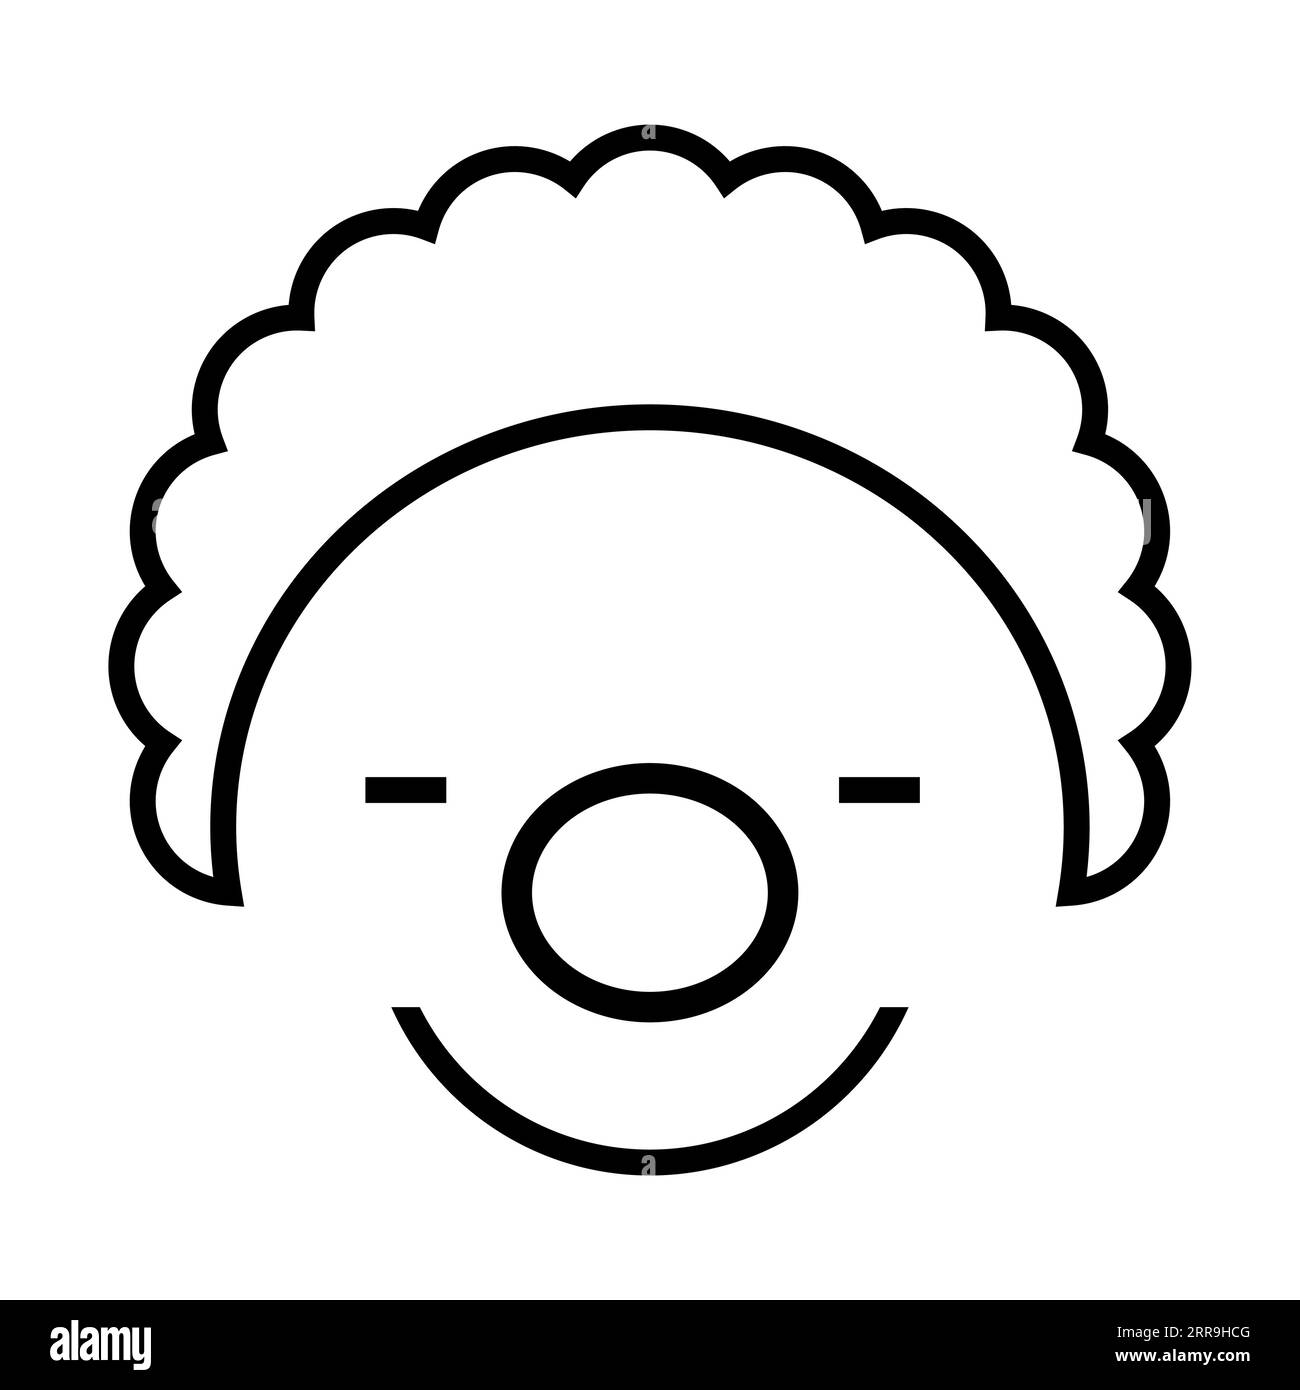 Clown face with big nose and curly wig isolated on white Stock Vector